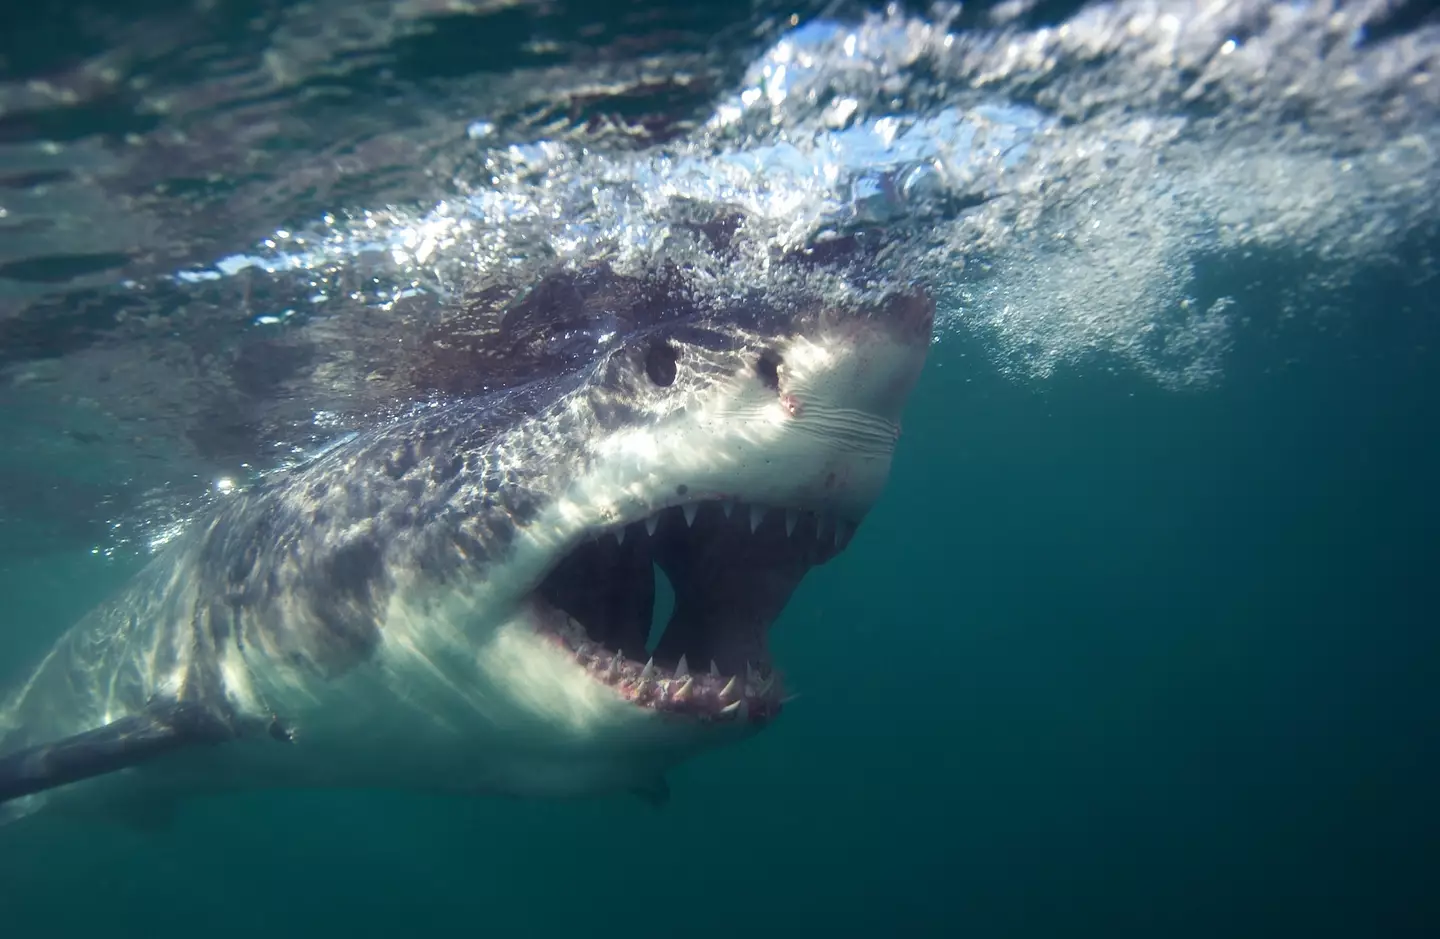 Randy Fry was diving off the coast of California when a shark suddenly appeared out of nowhere.